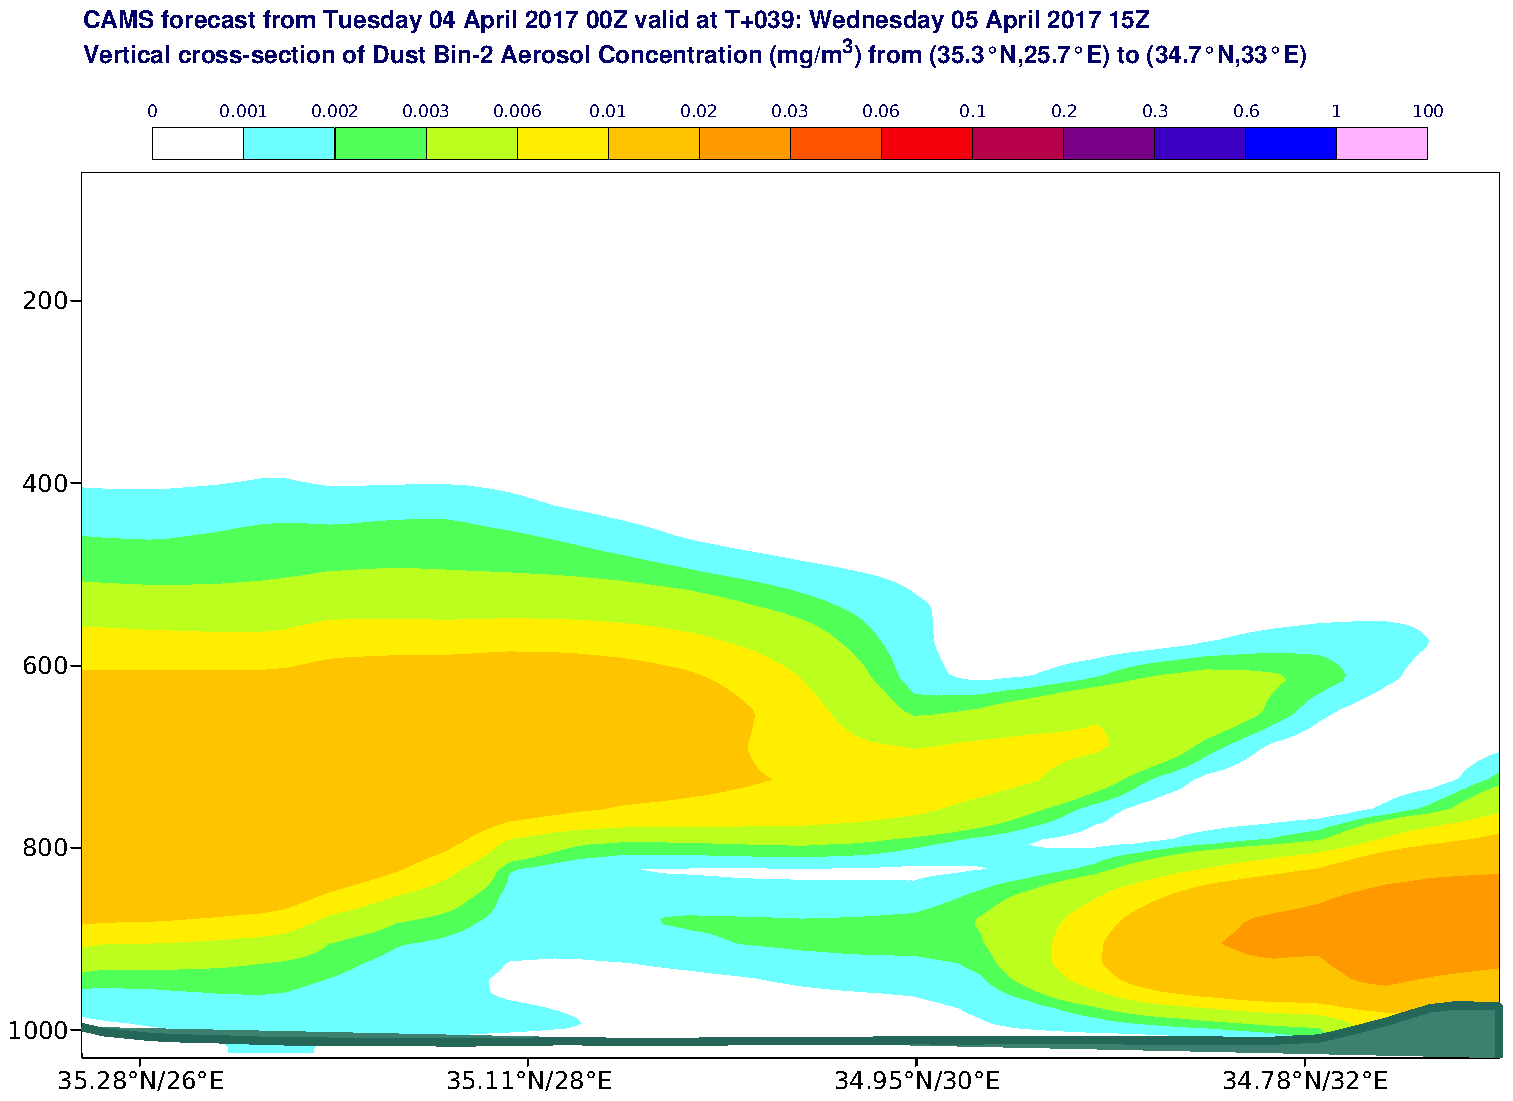 Vertical cross-section of Dust Bin-2 Aerosol Concentration (mg/m3) valid at T39 - 2017-04-05 15:00